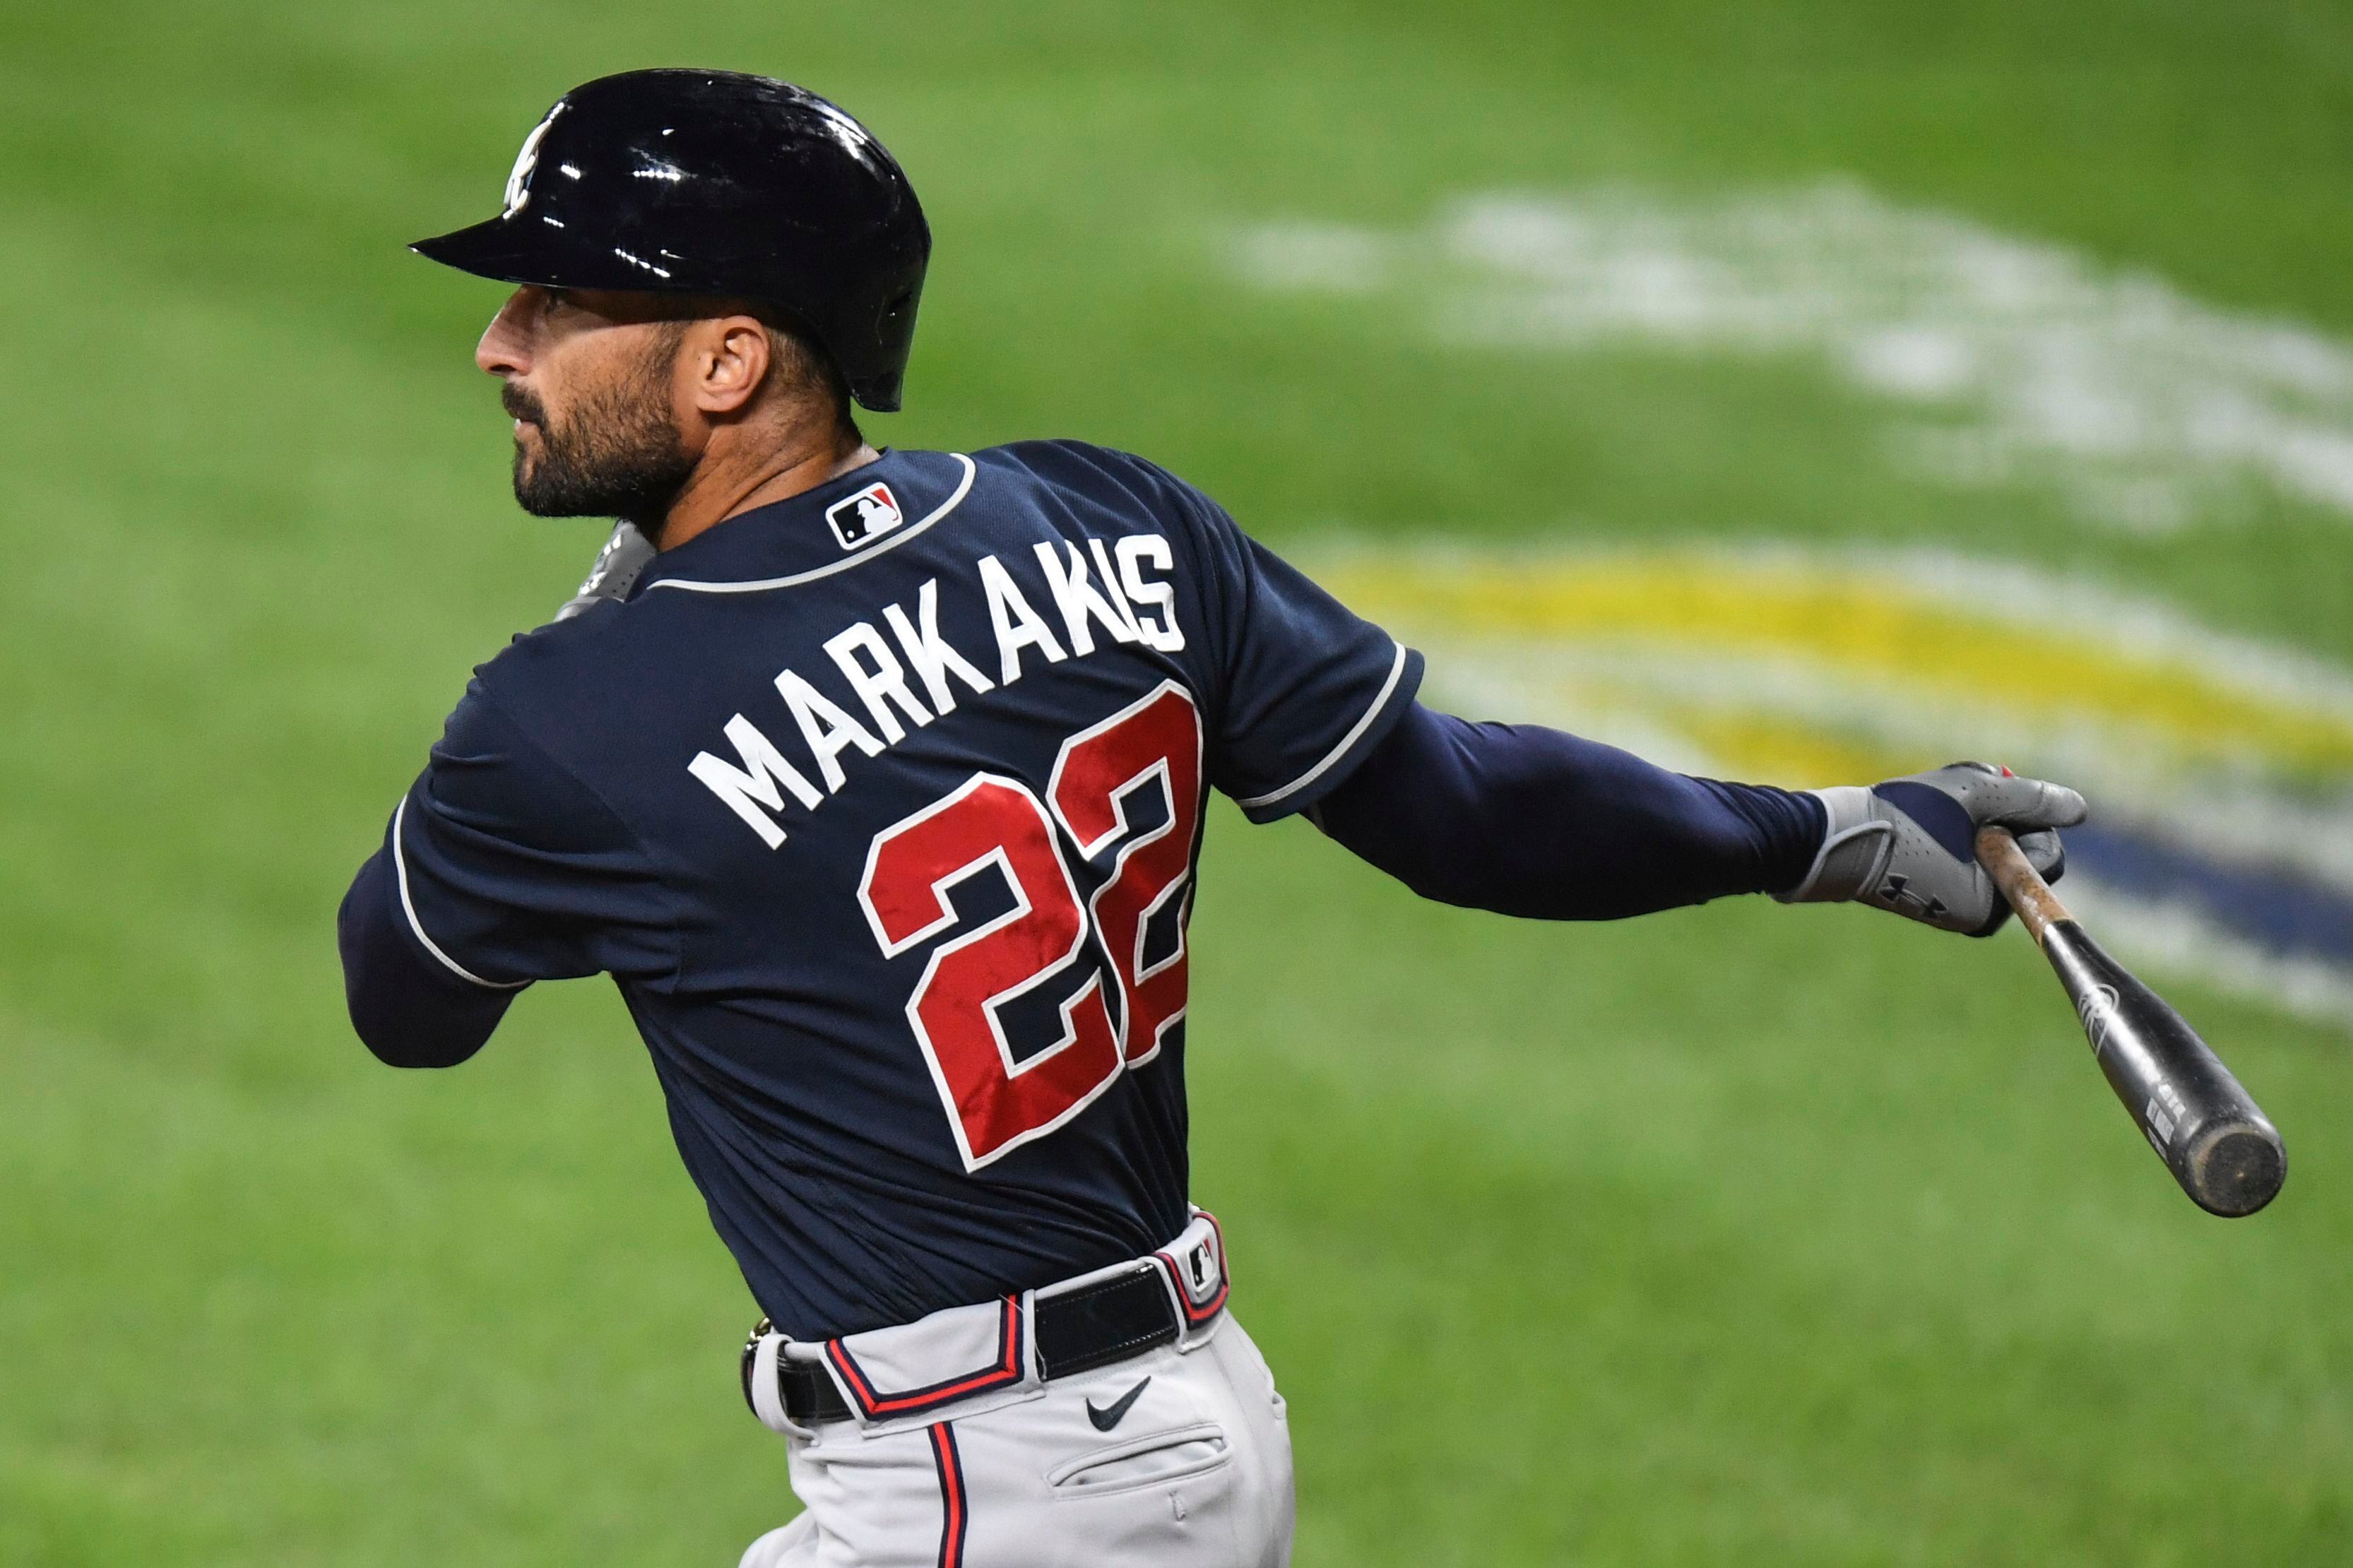 Nick Markakis has night he'll 'never forget' in return to Camden Yards –  Orlando Sentinel